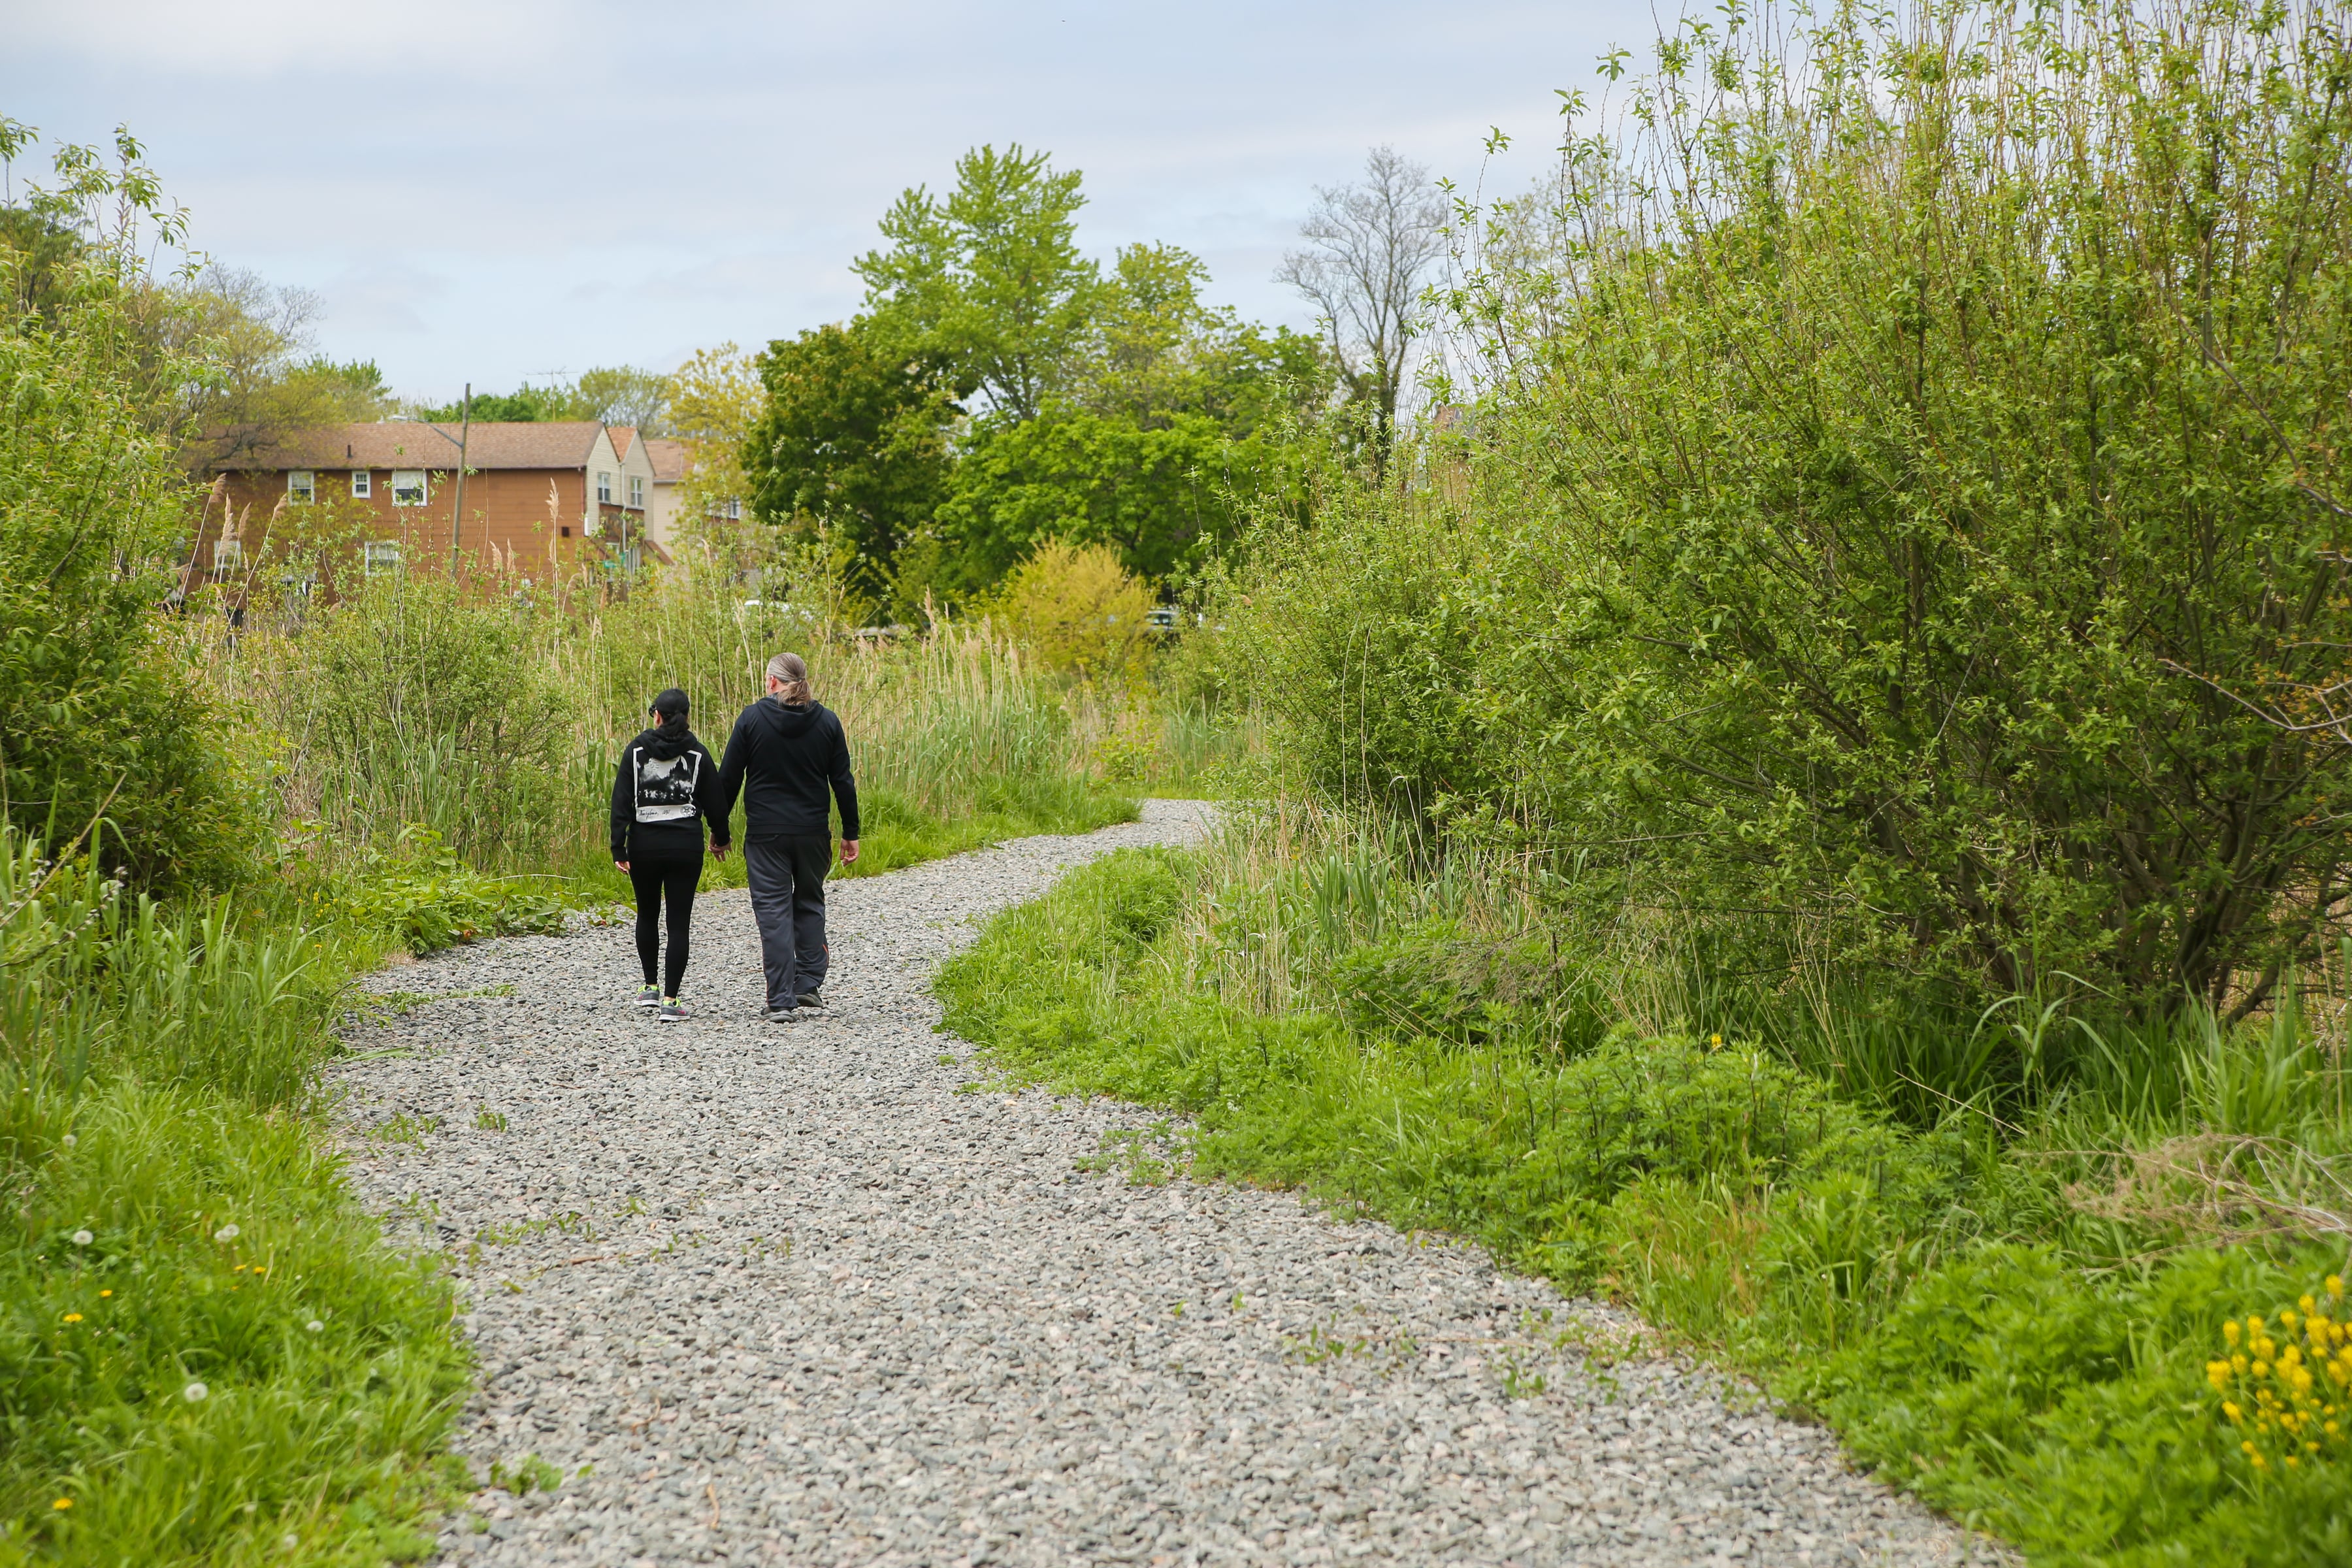 Couple, holding hands, walks on a gravel path surrounded by greenery, with a brick house in the background.